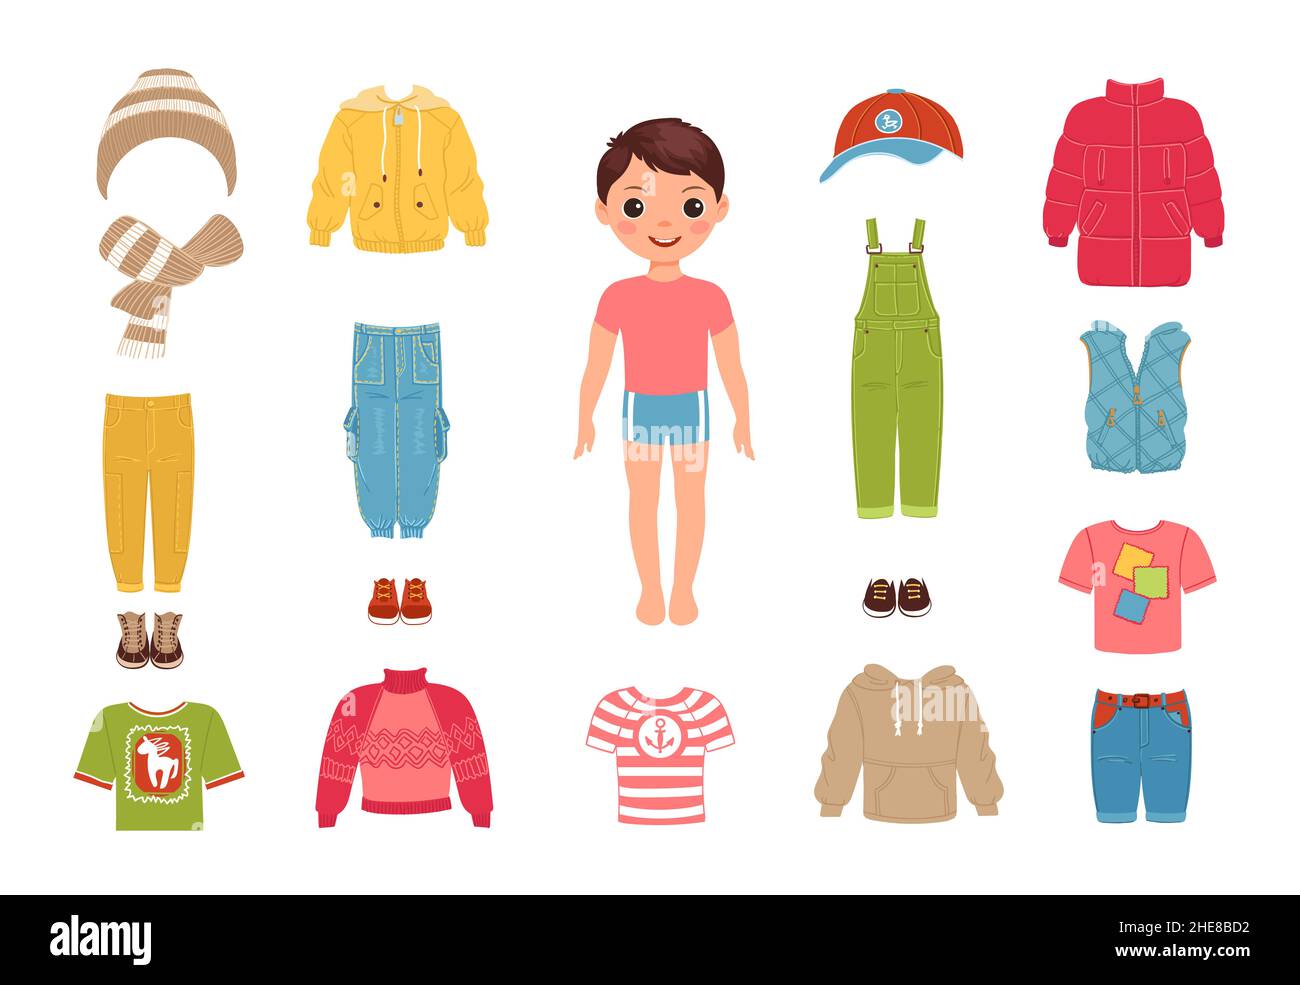 Paper dolls Stock Vector Images - Alamy